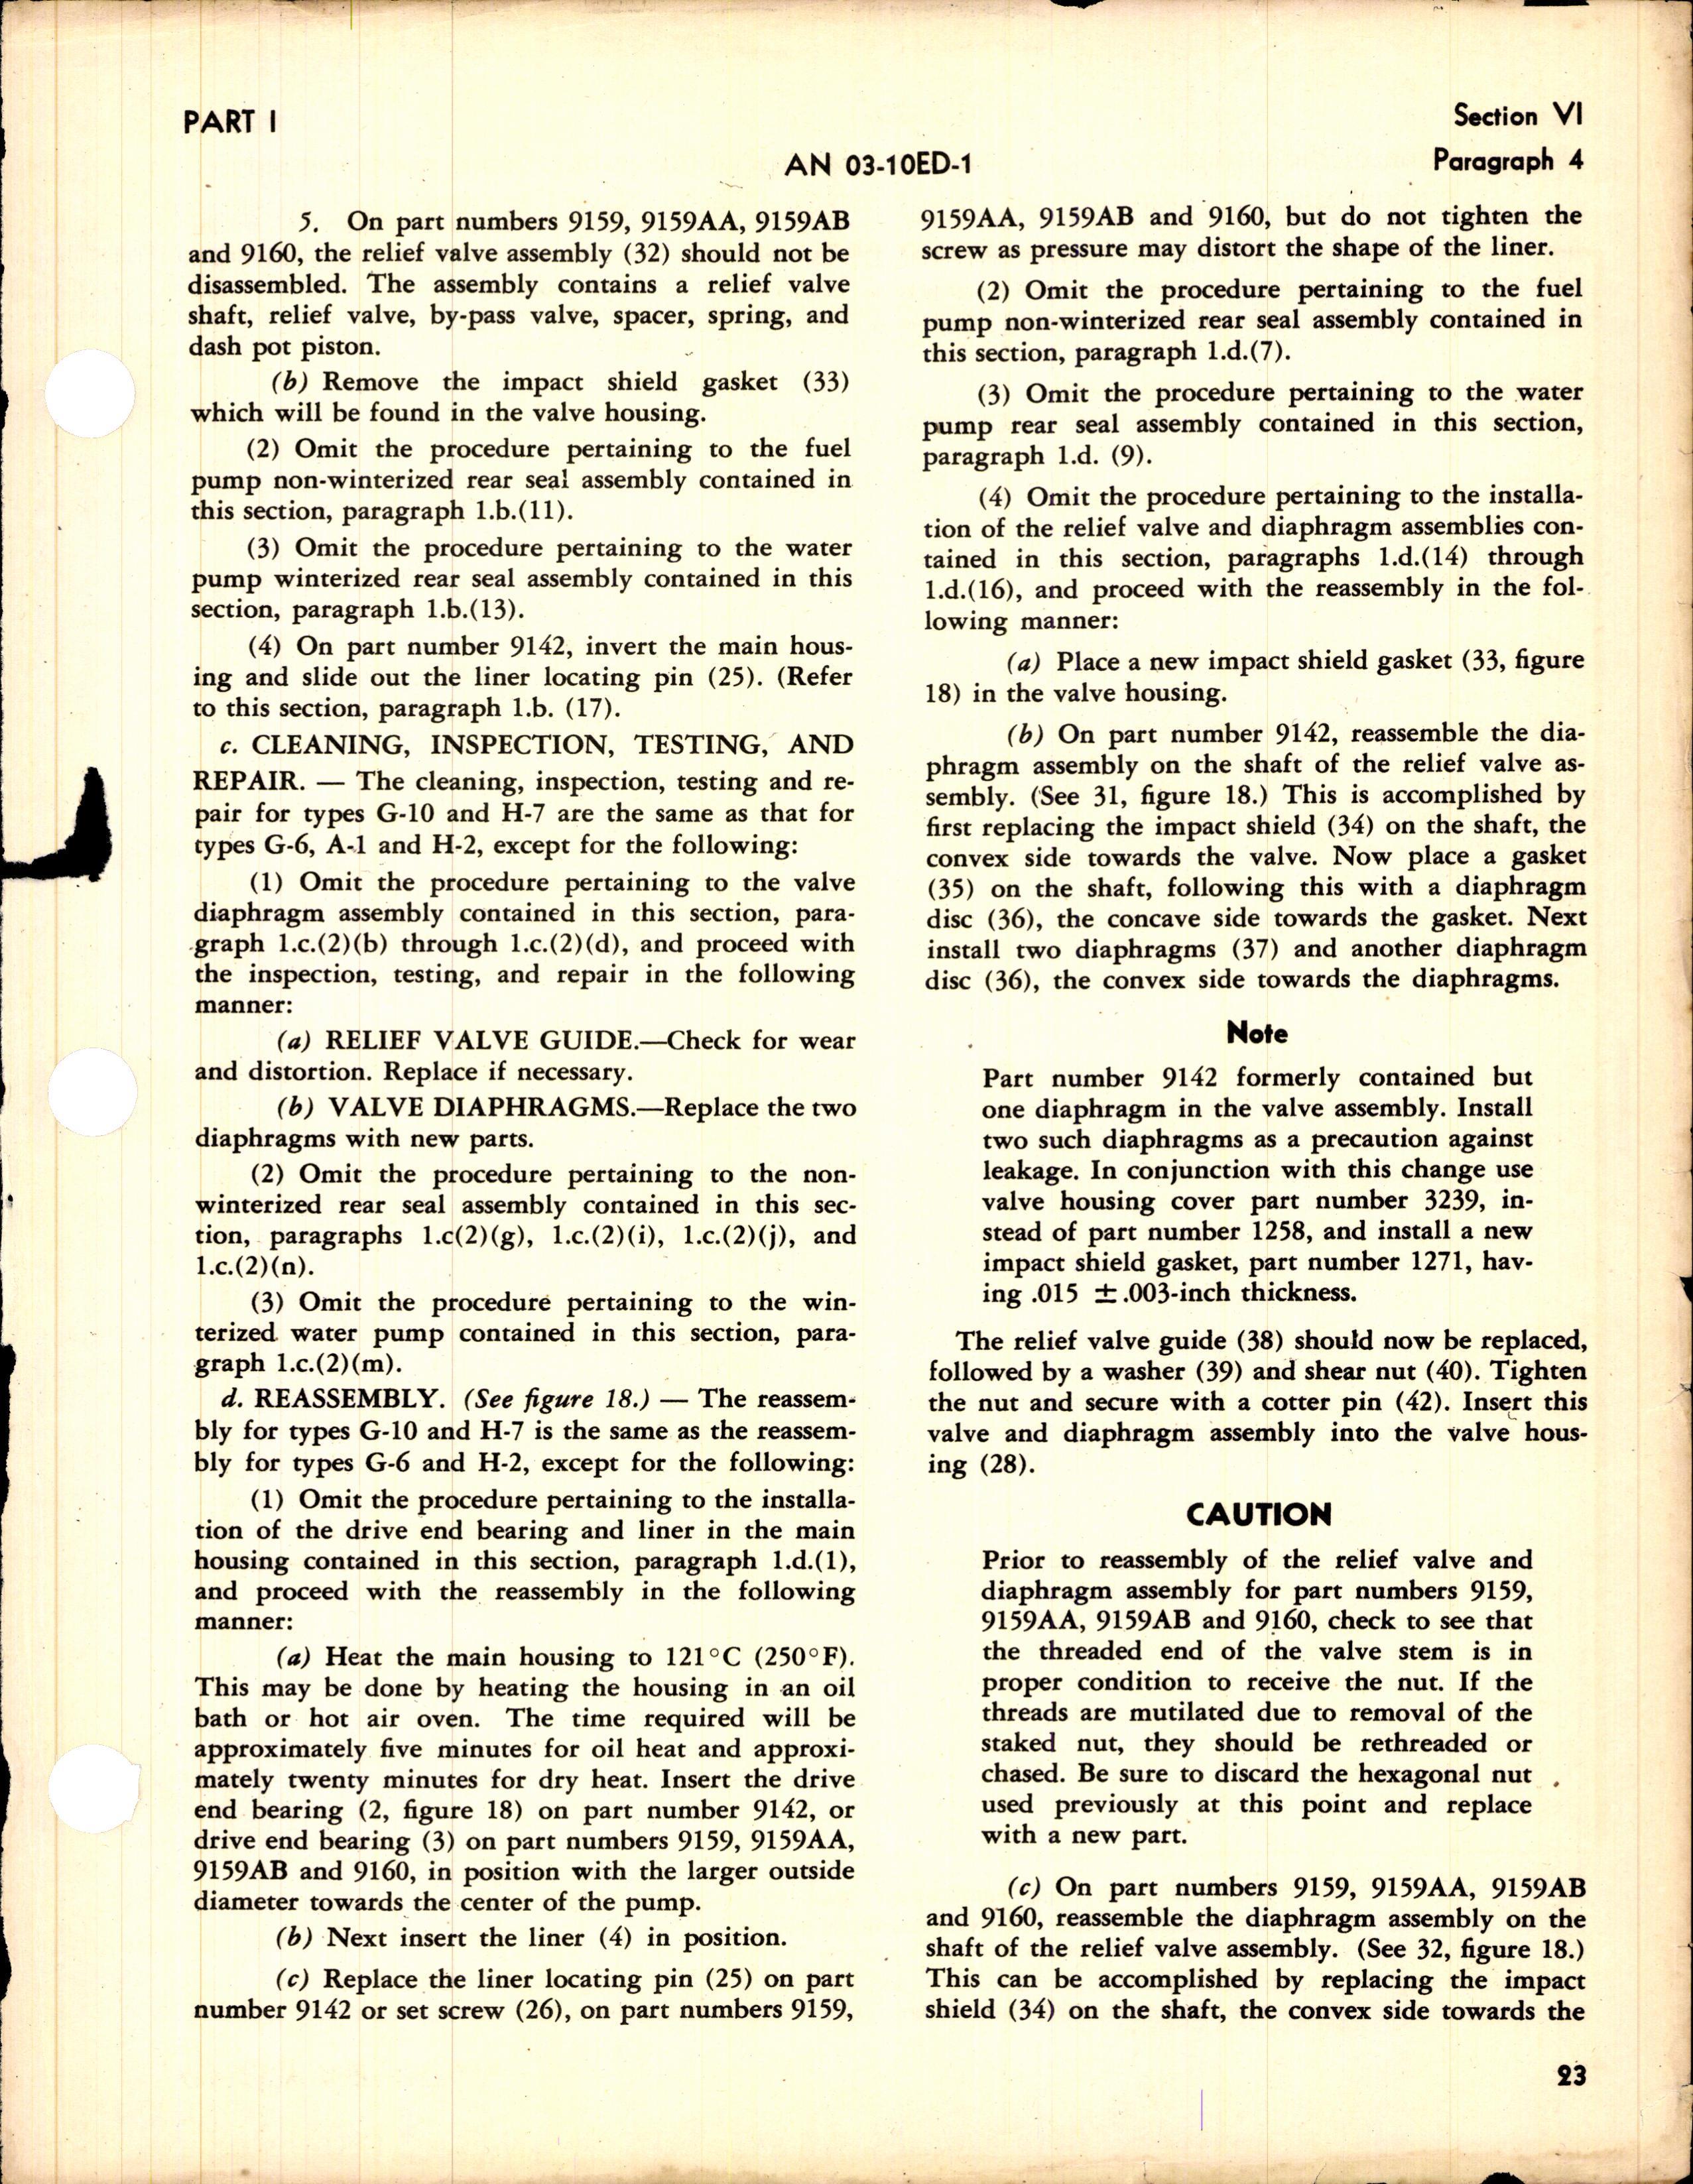 Sample page 3 from AirCorps Library document: Operation, Service, & Overhaul Instructions with Parts Catalog for Fuel and Water Pumps - Engine Driven